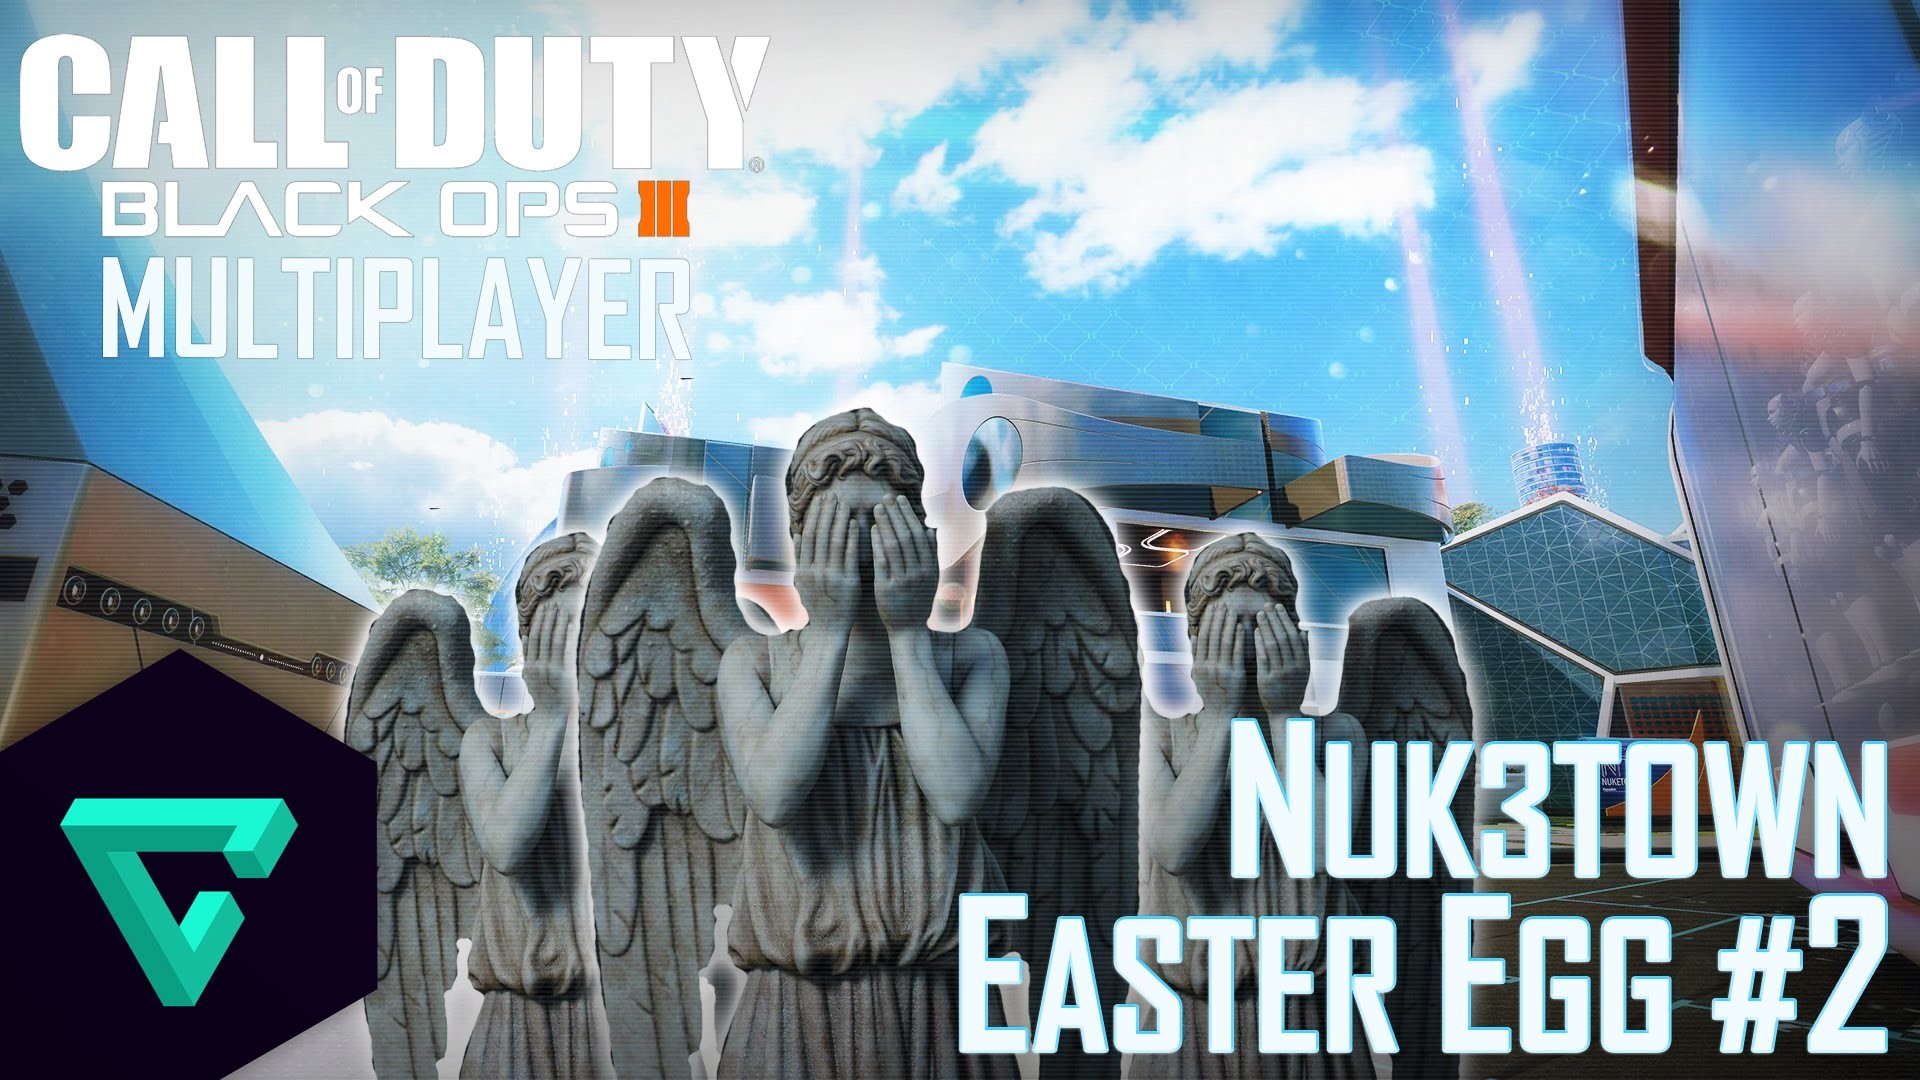 1920x1080 "Doctor Who Weeping Angels" Mannequin Secret on Nuk3town - Call of Duty:  Black Ops III (1080p 60fps)